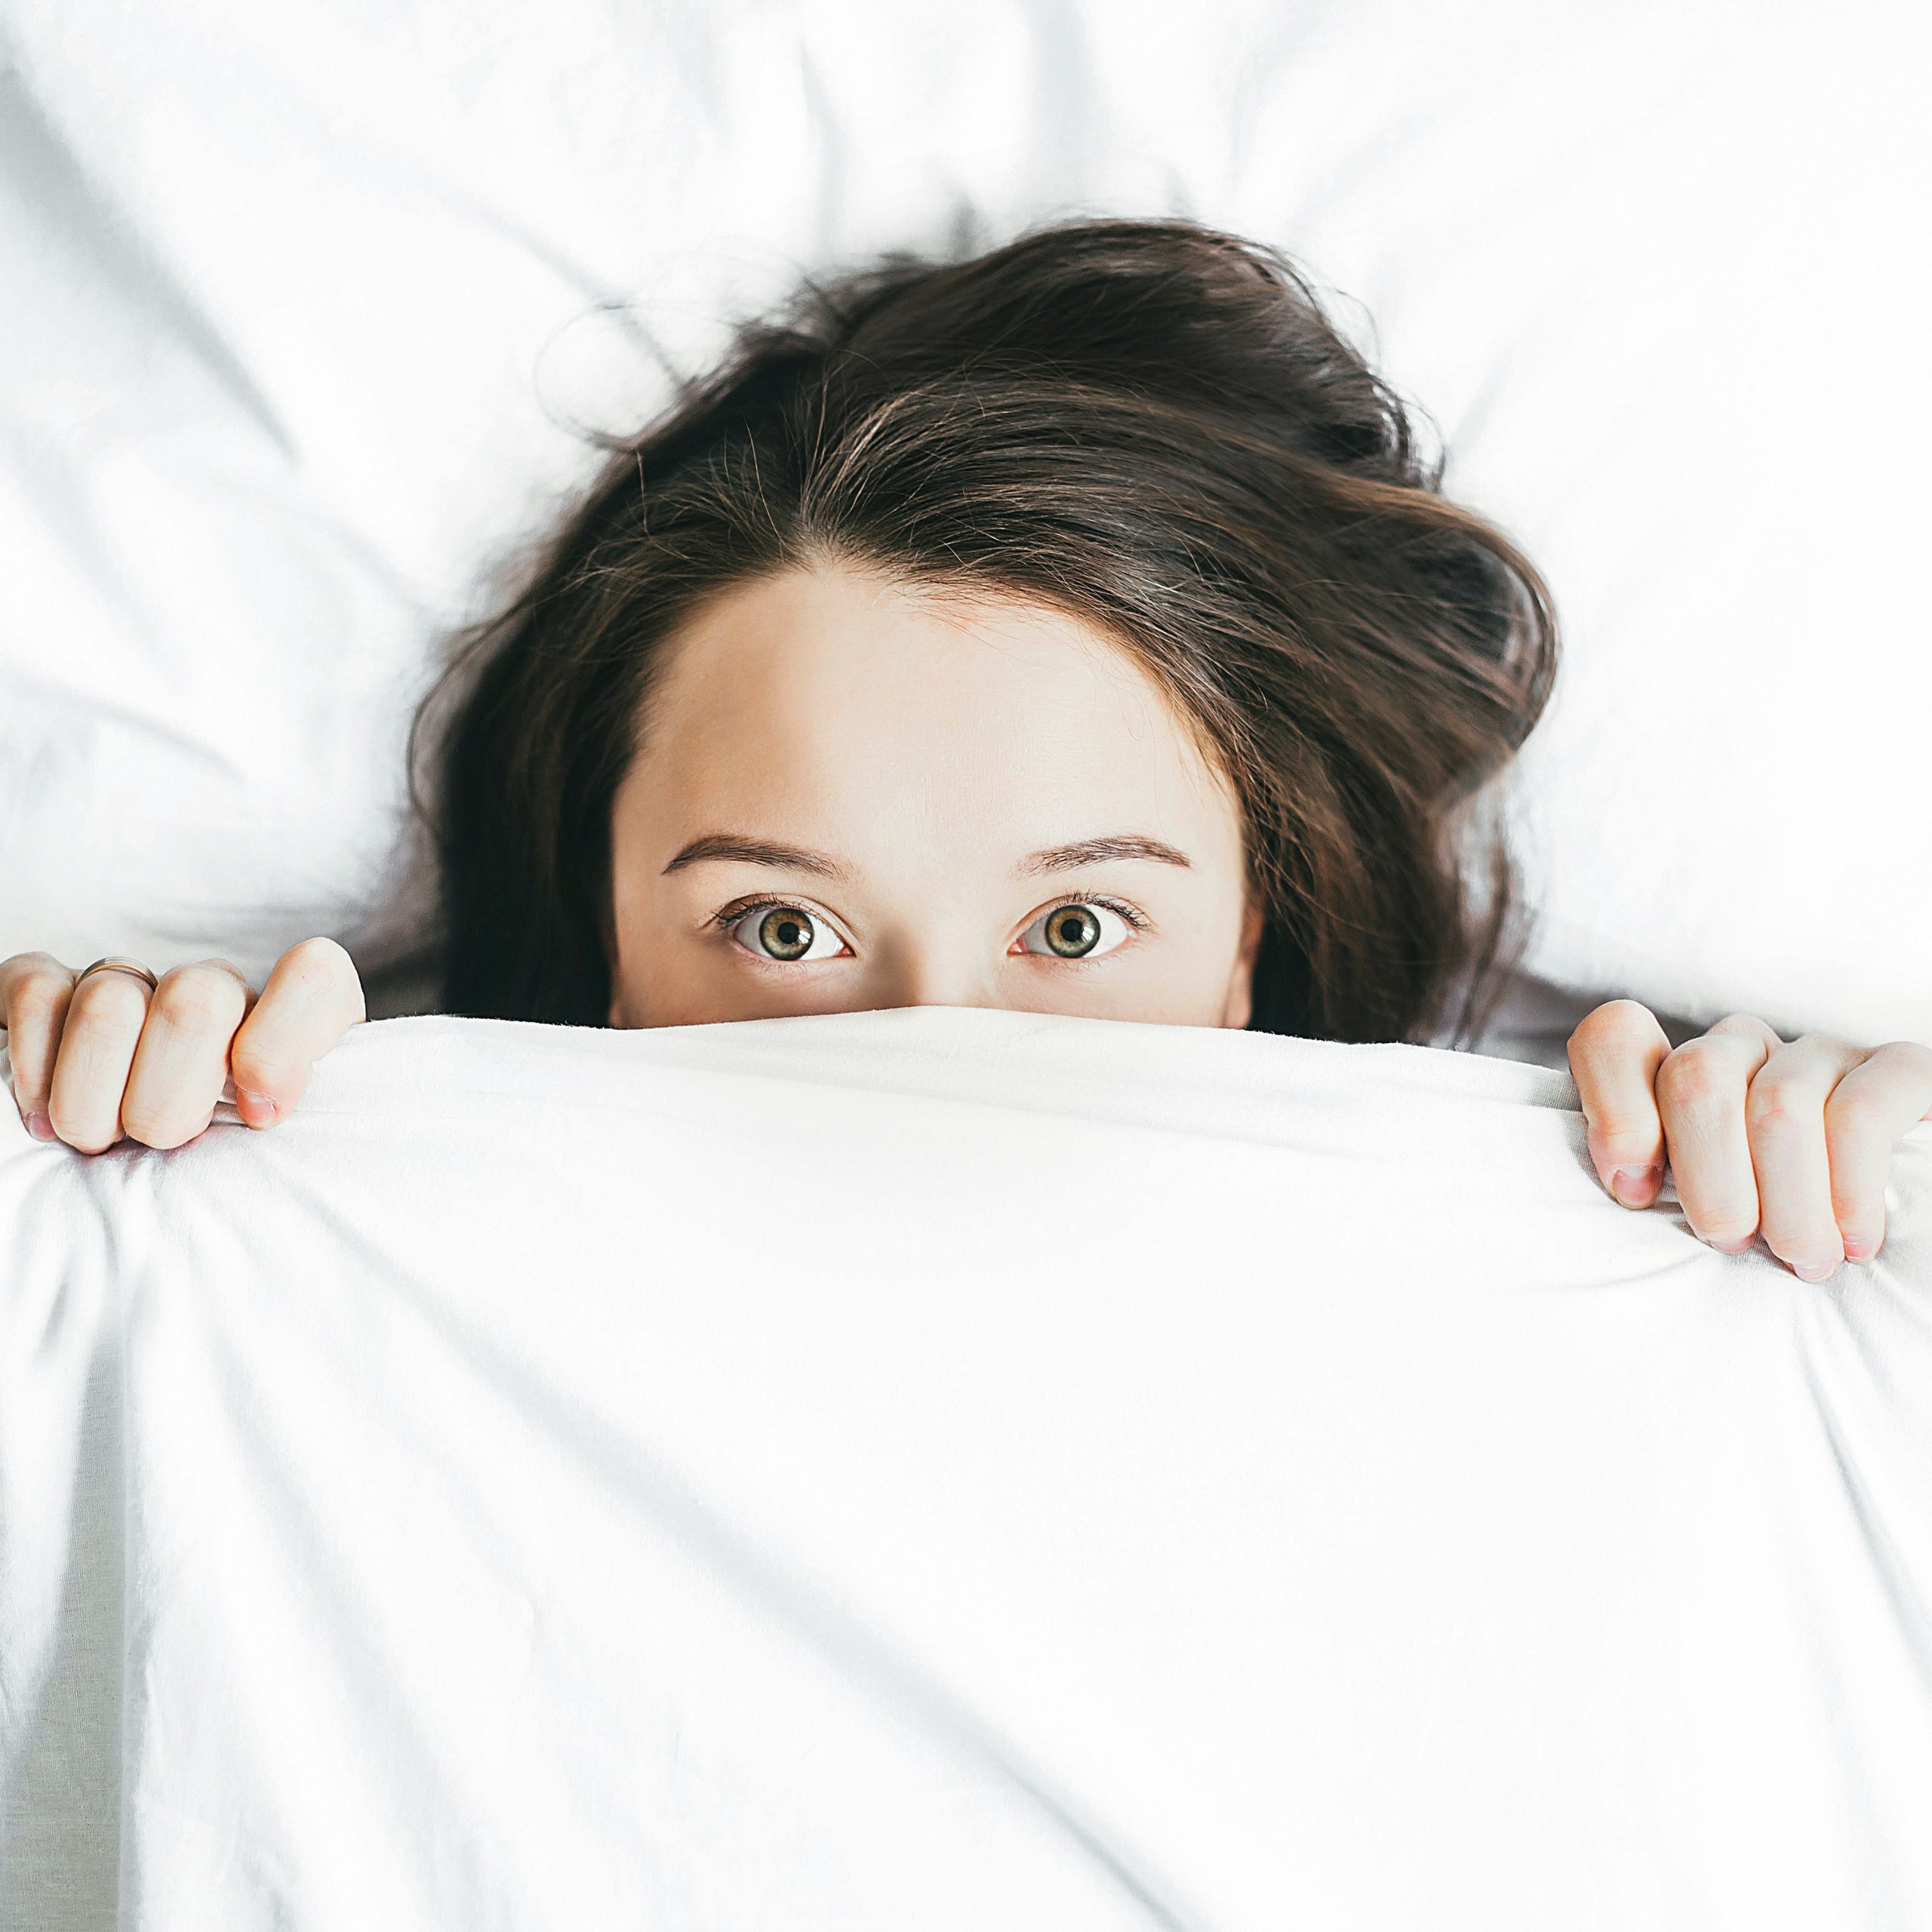 Discover how quality sleep can boost your immune system. Learn the science behind sleep and immunity, and get practical sleep tips to enhance your overall health.